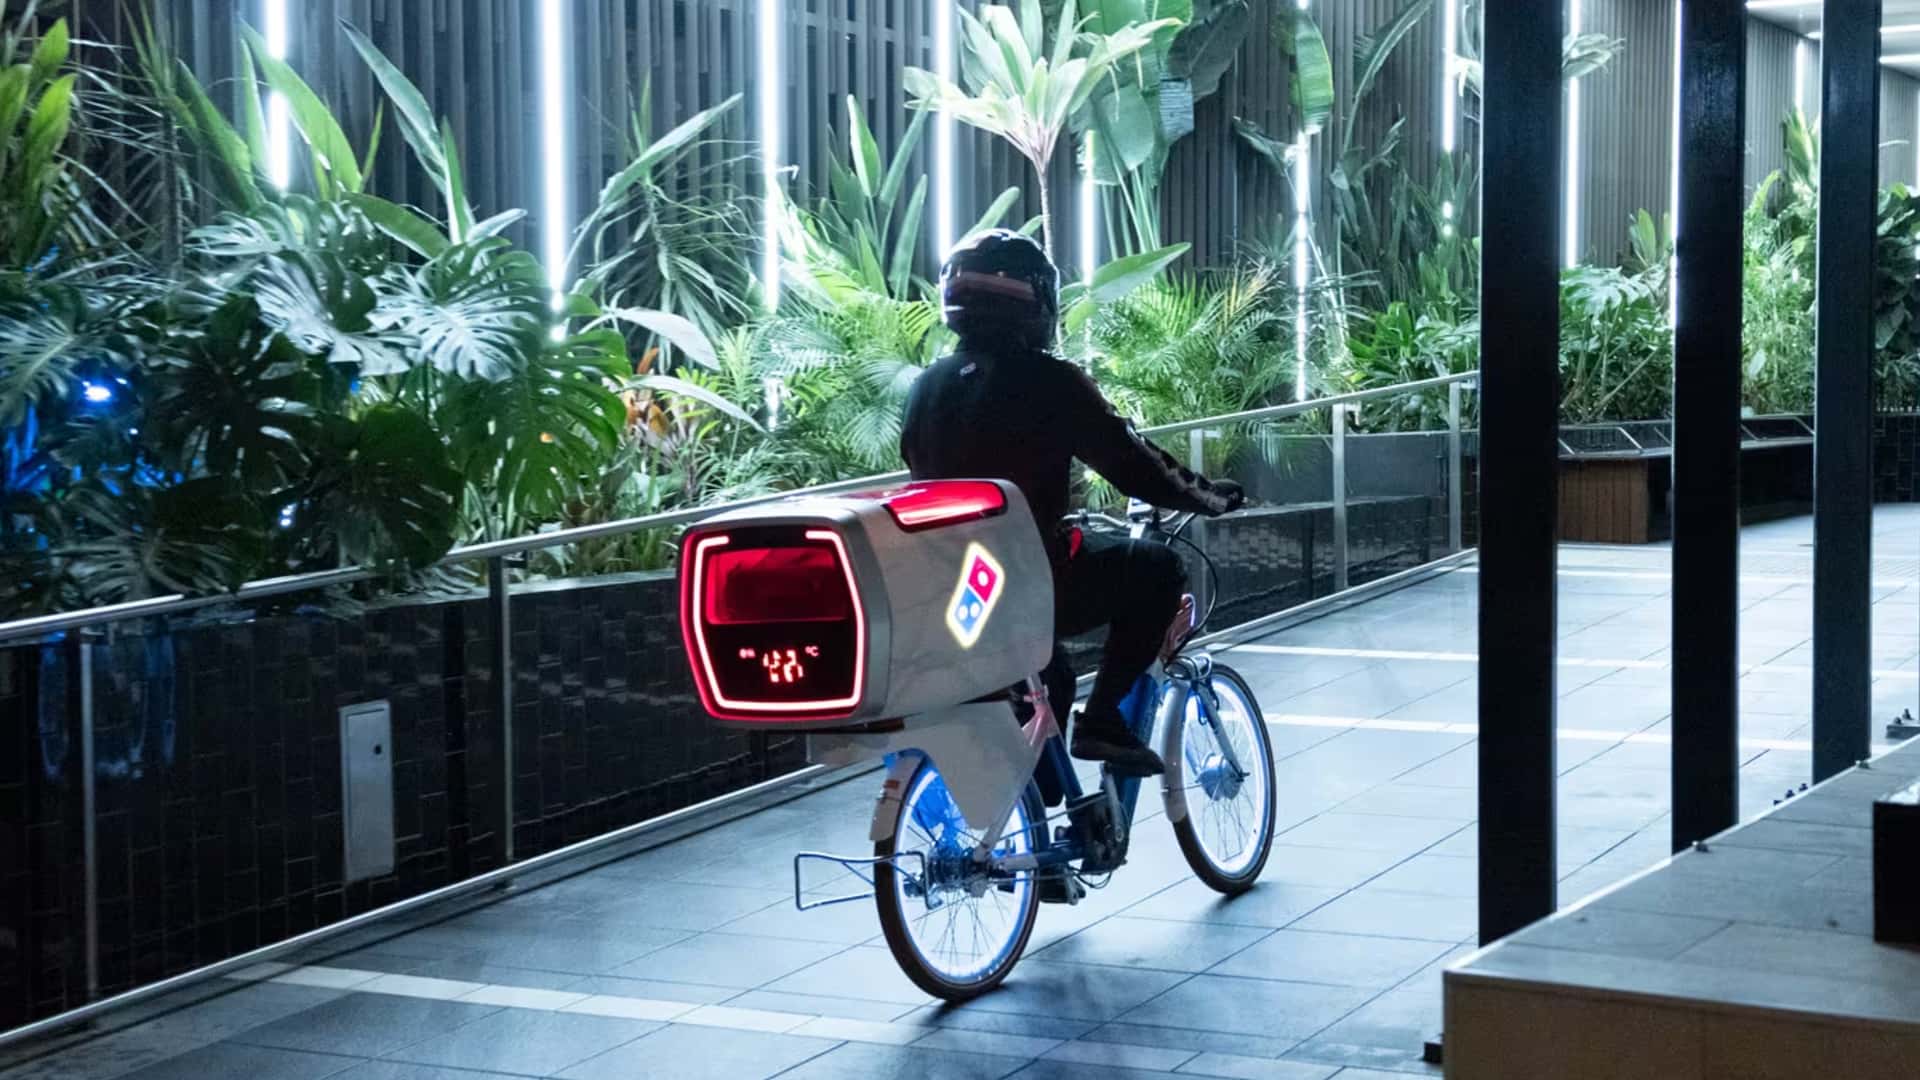 domino’s promises hot and fresh pizzas with new delivery e-bike